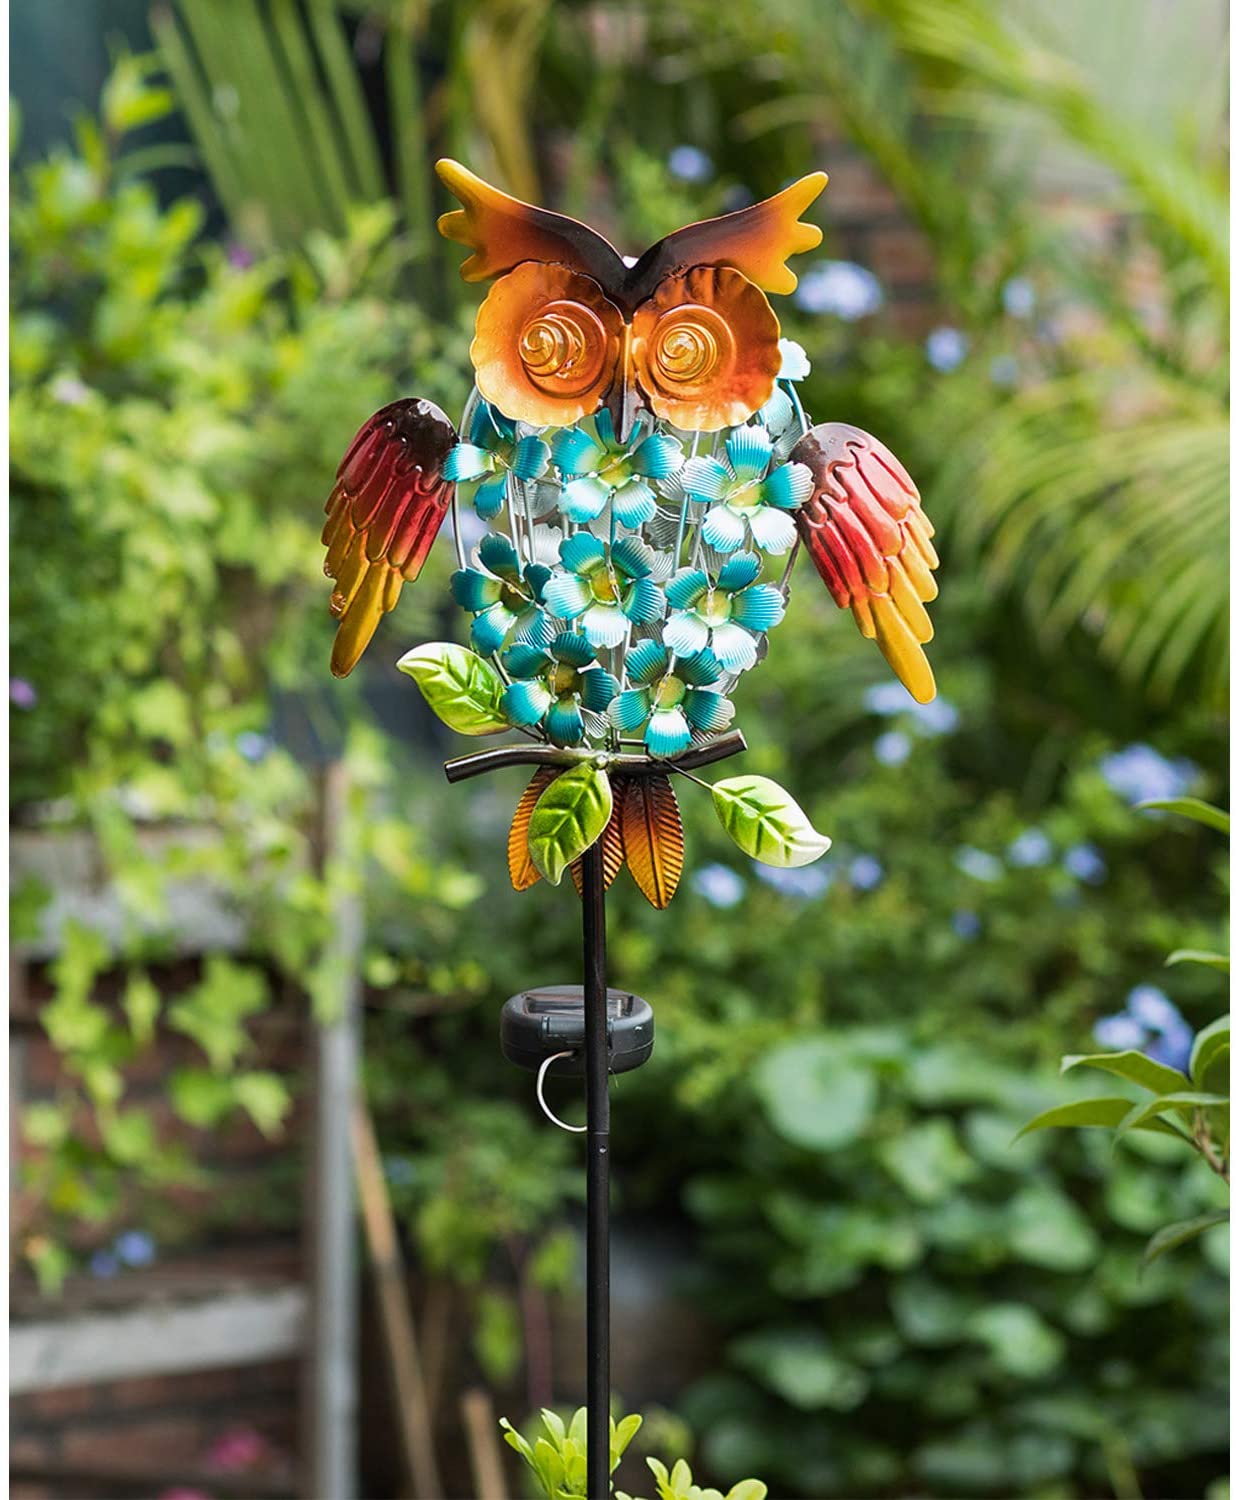 Garden Solar Lights Owl Pathway Outdoor Stake Metal Lights Waterproof Warm White LED for Lawn Patio or Courtyard